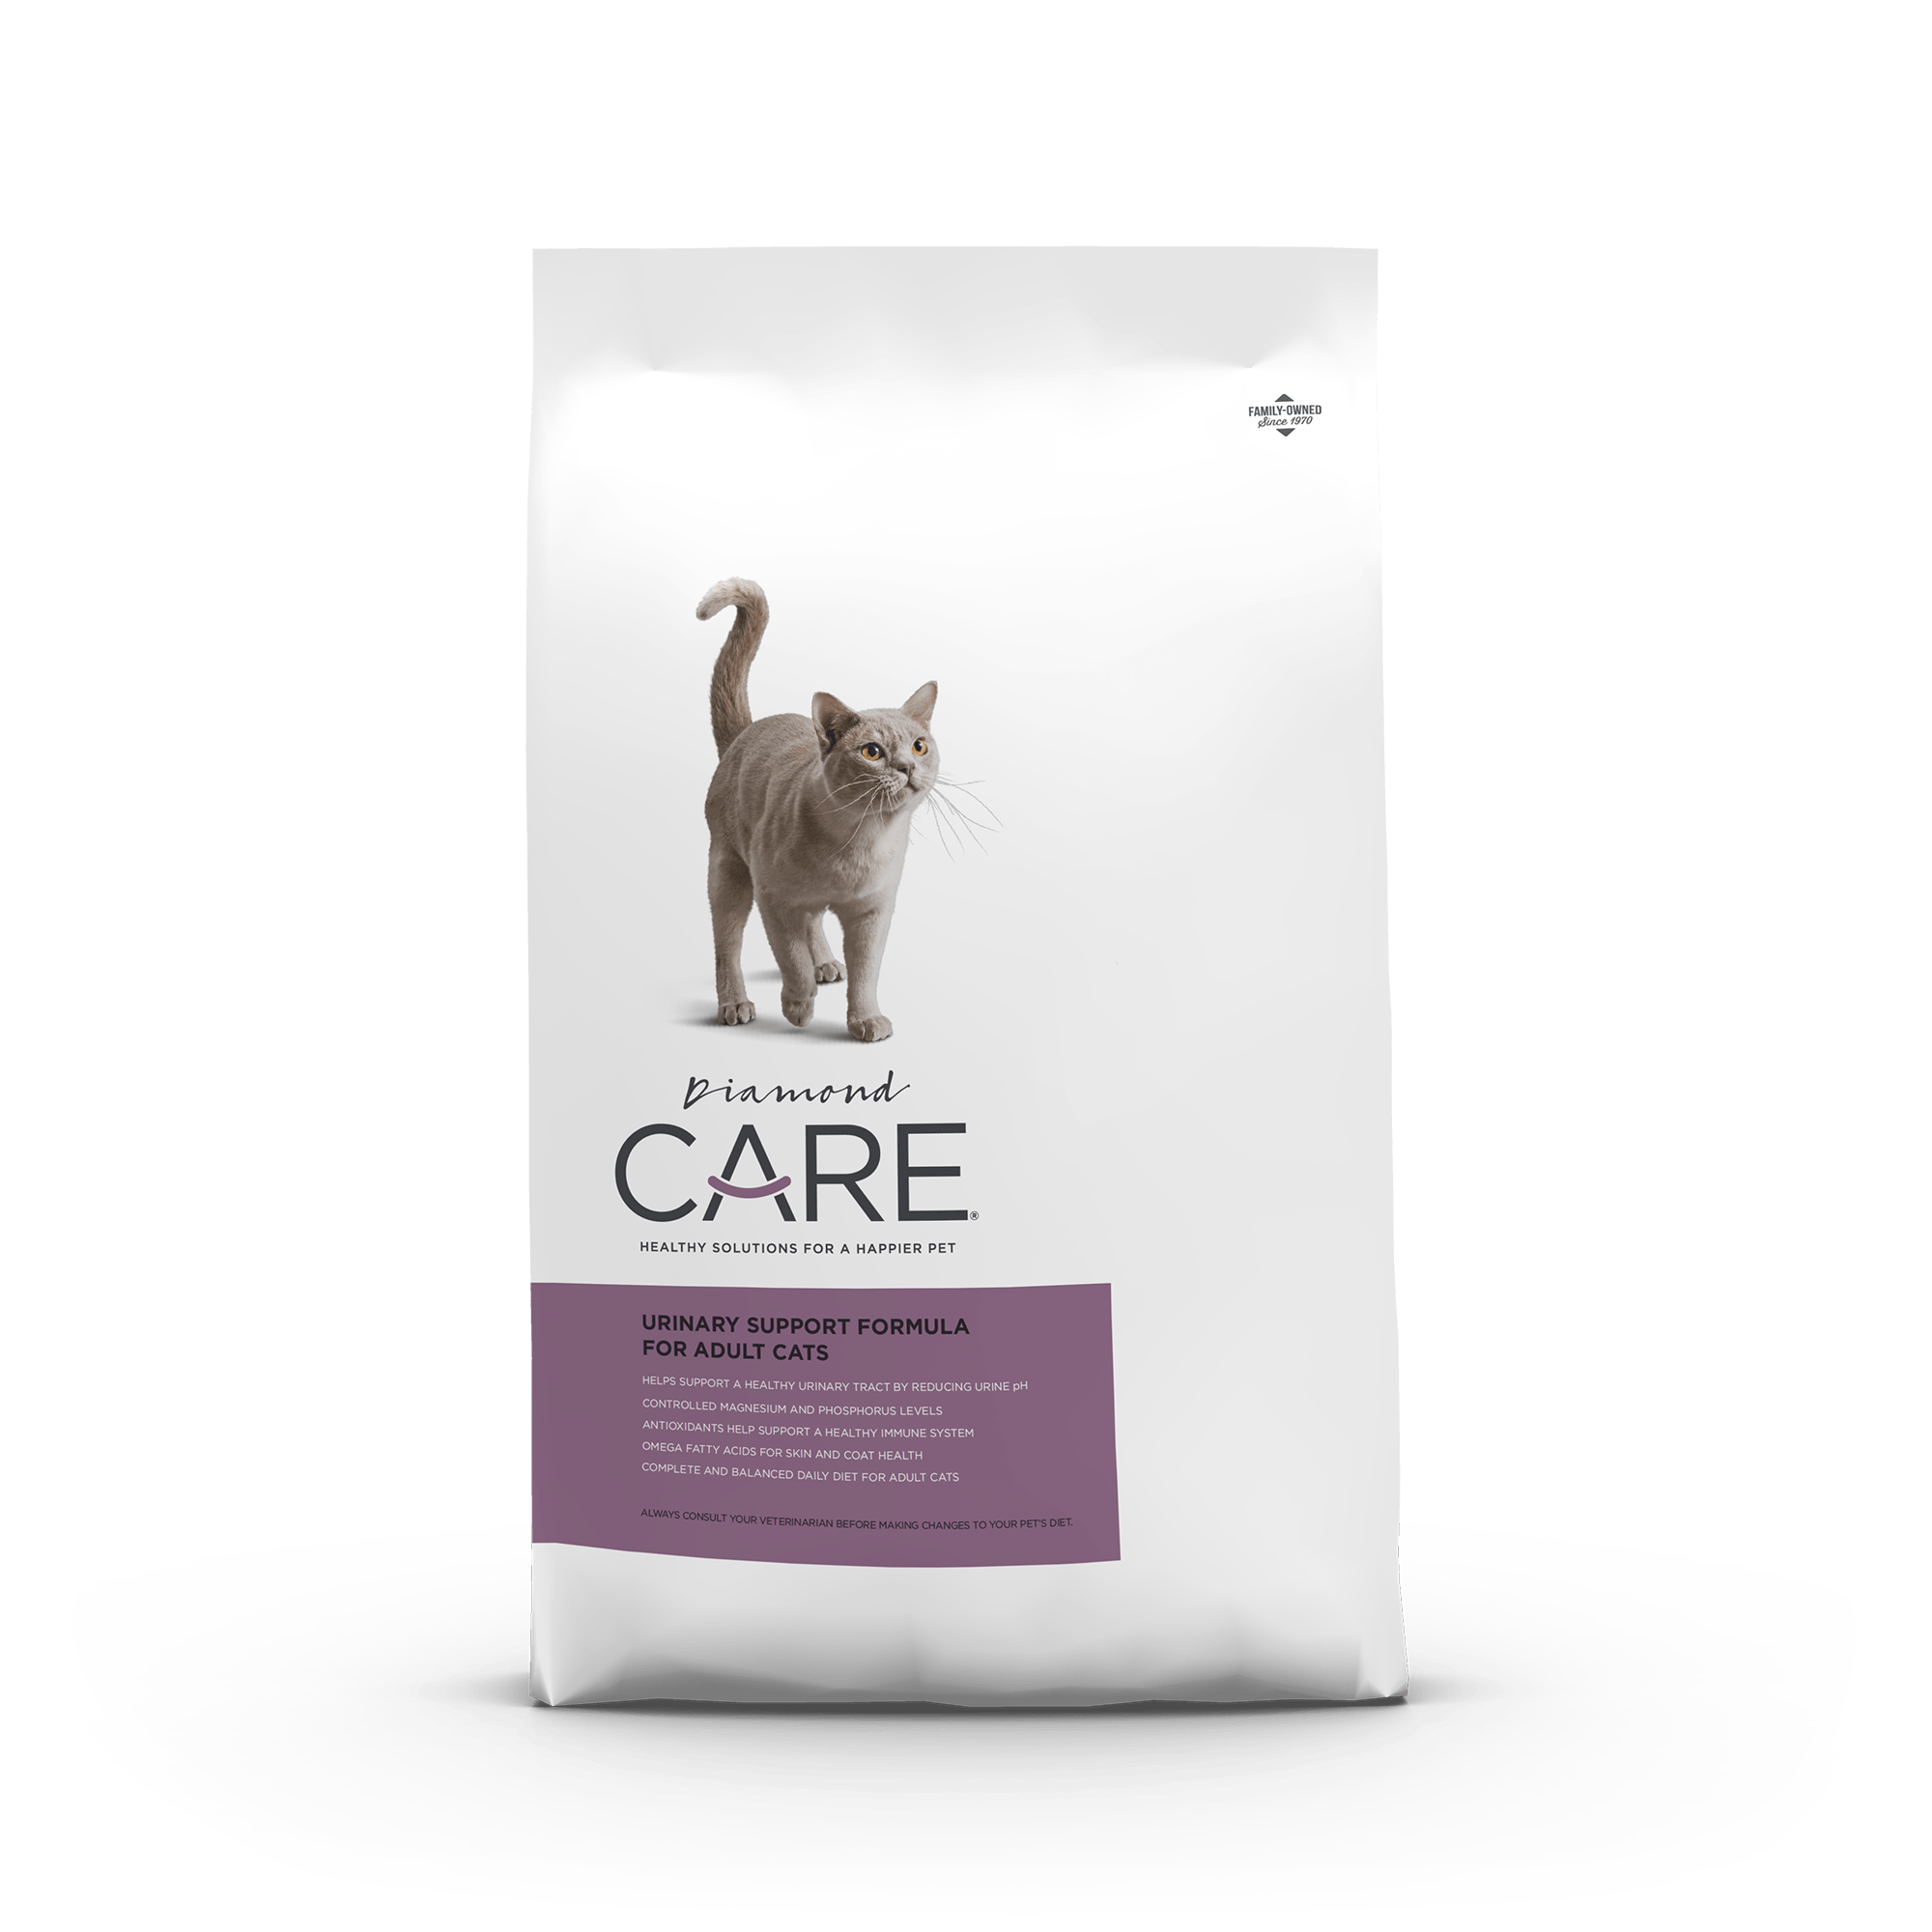 Diamond CARE Urinary Support Formula for Adult Cats product packaging